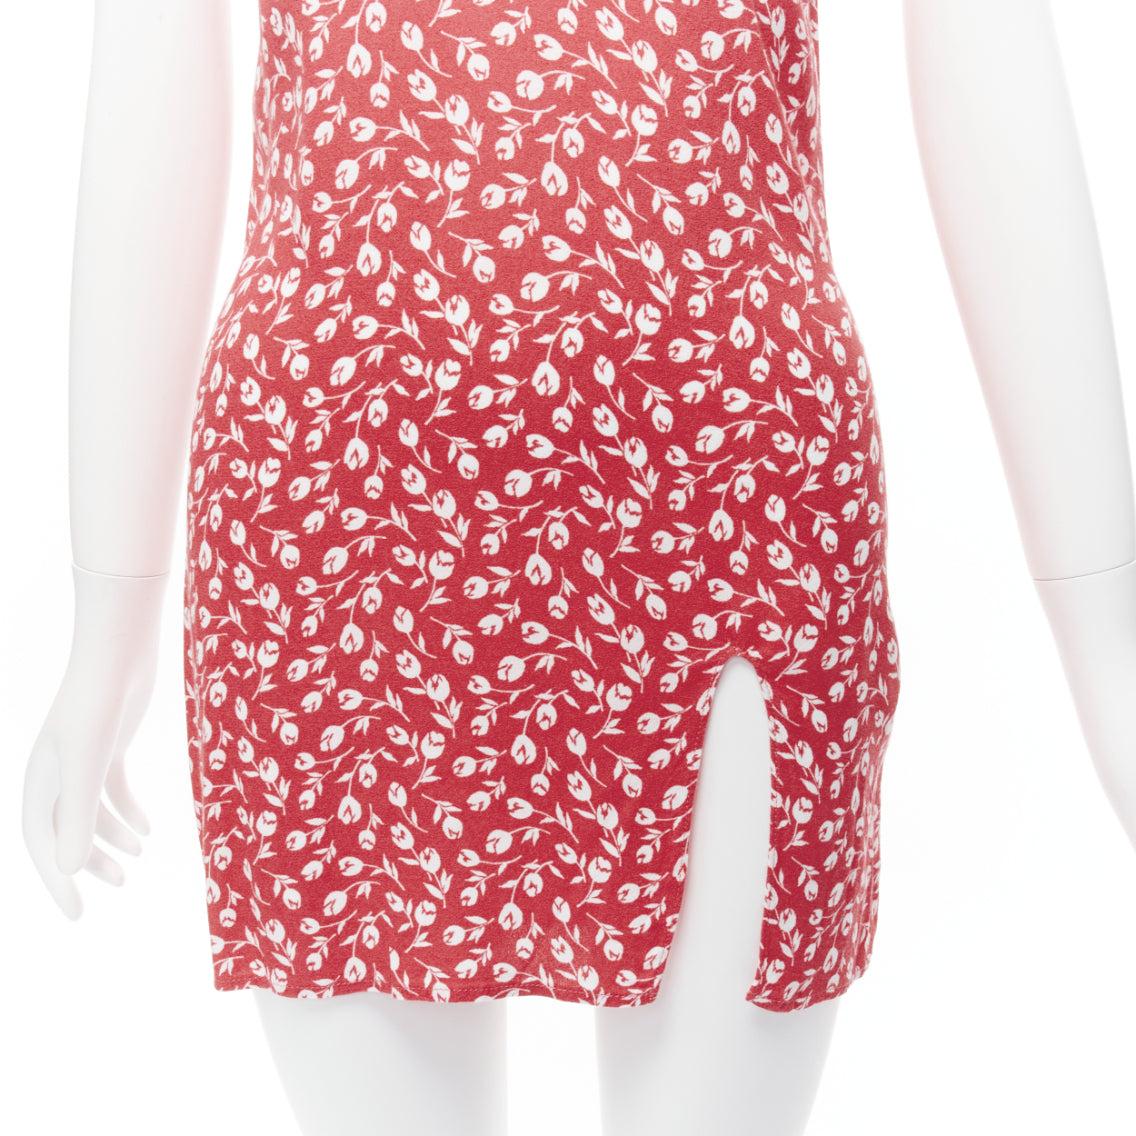 REFORMATION Marlowe pink white floral print high slit mini slip dress XS
Reference: SNKO/A00403
Brand: Reformation
Model: Marlowe
Material: Viscose, Blend
Color: Pink, White
Pattern: Floral
Closure: Slip On
Made in: United